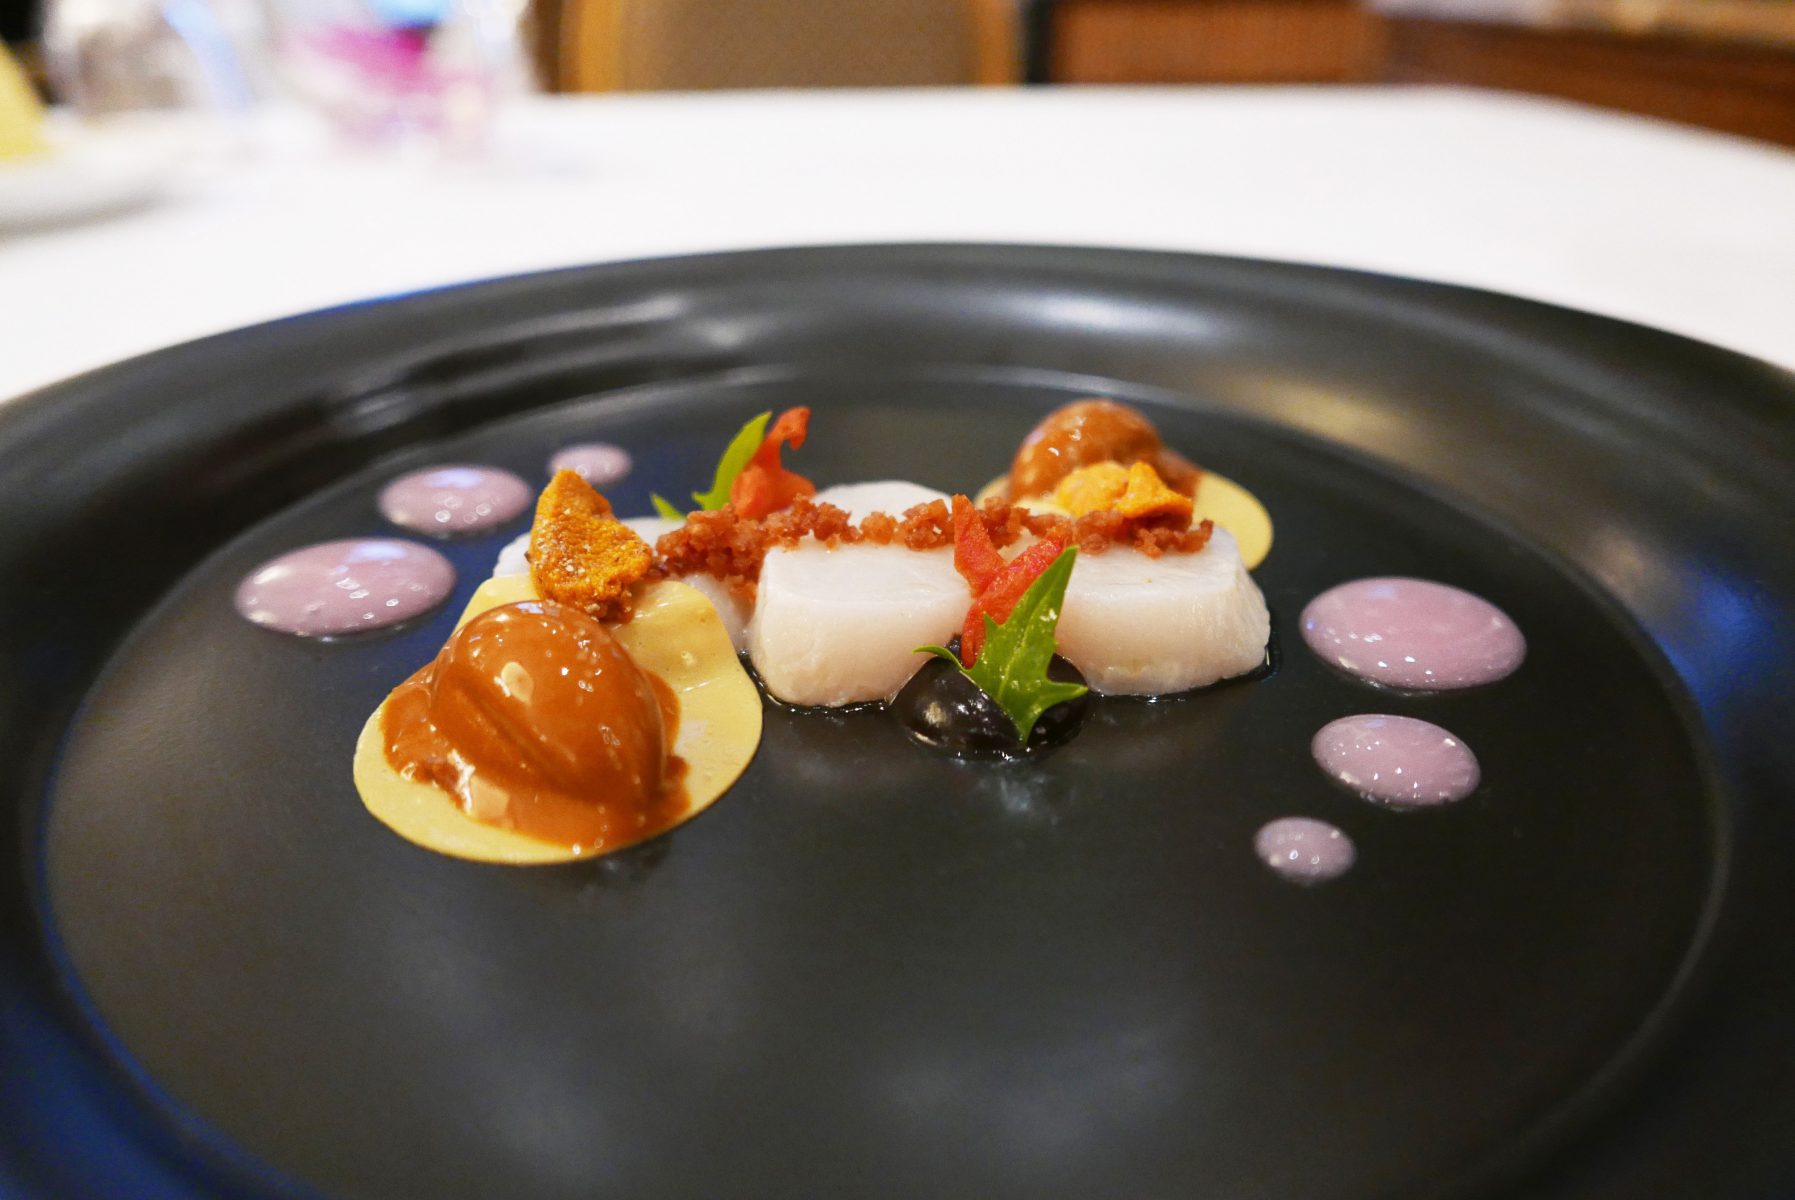 Slightly marinated scallops, sea urchin,lychee reduction at Le Cinq Paris